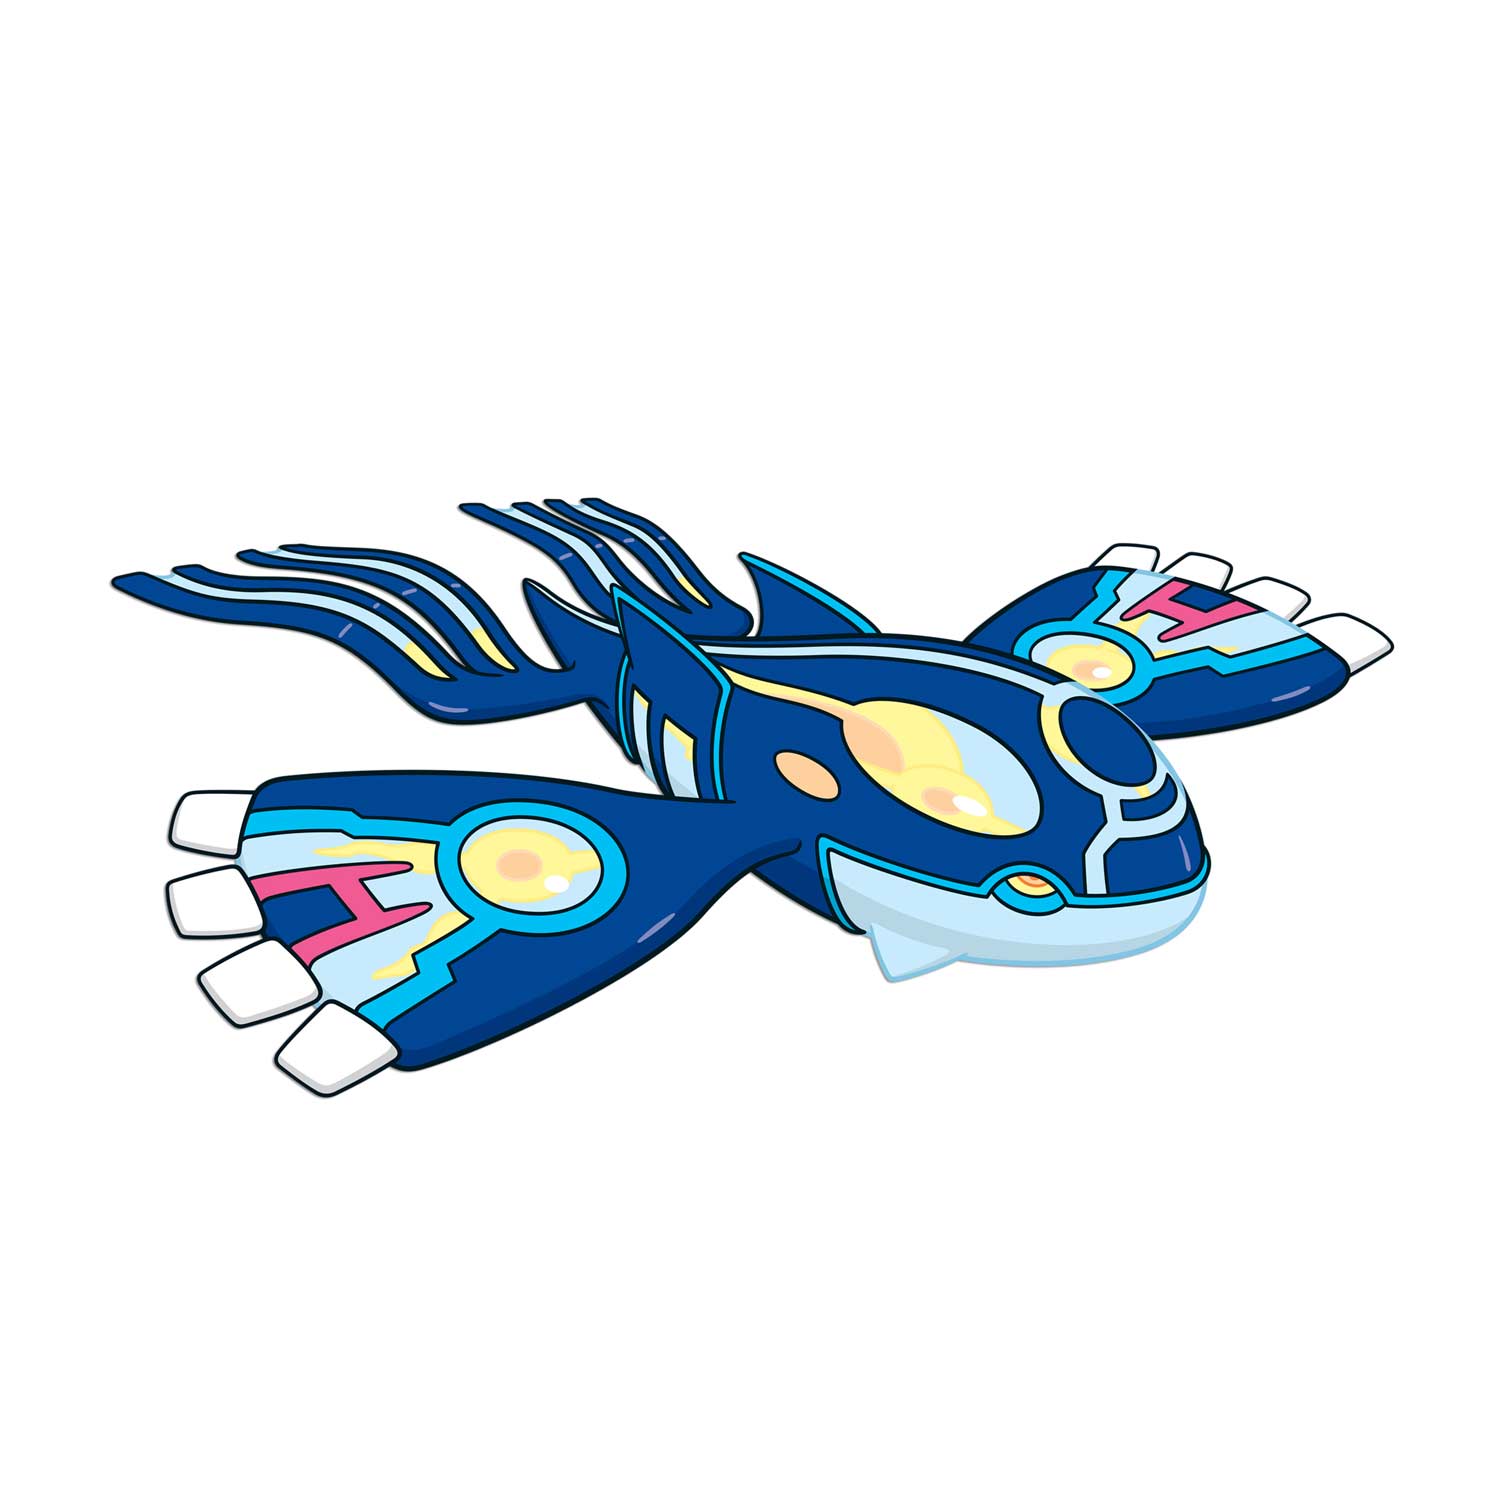 Primal Kyogre Wall Graphic. Pokémon Center Official Site